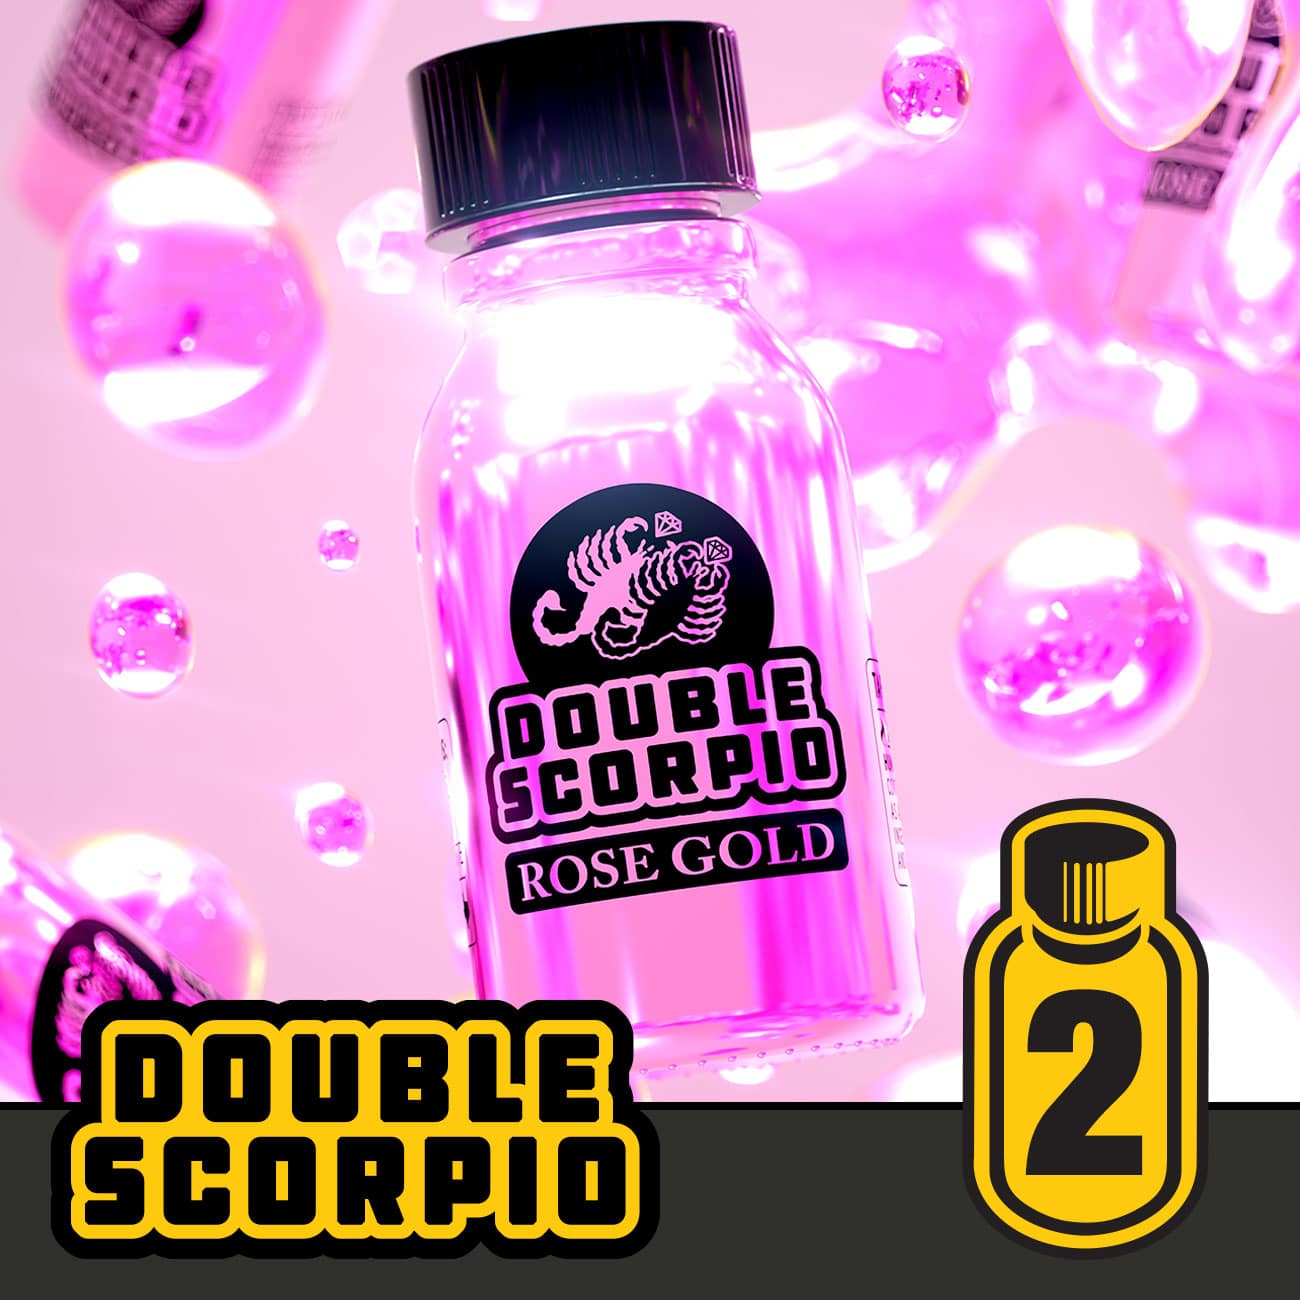 A vibrant pink bottle of "double scorpio rose gold - twin pack" highlighted by radiant pink lighting and floating bubbles, set against a playful, energetic background.